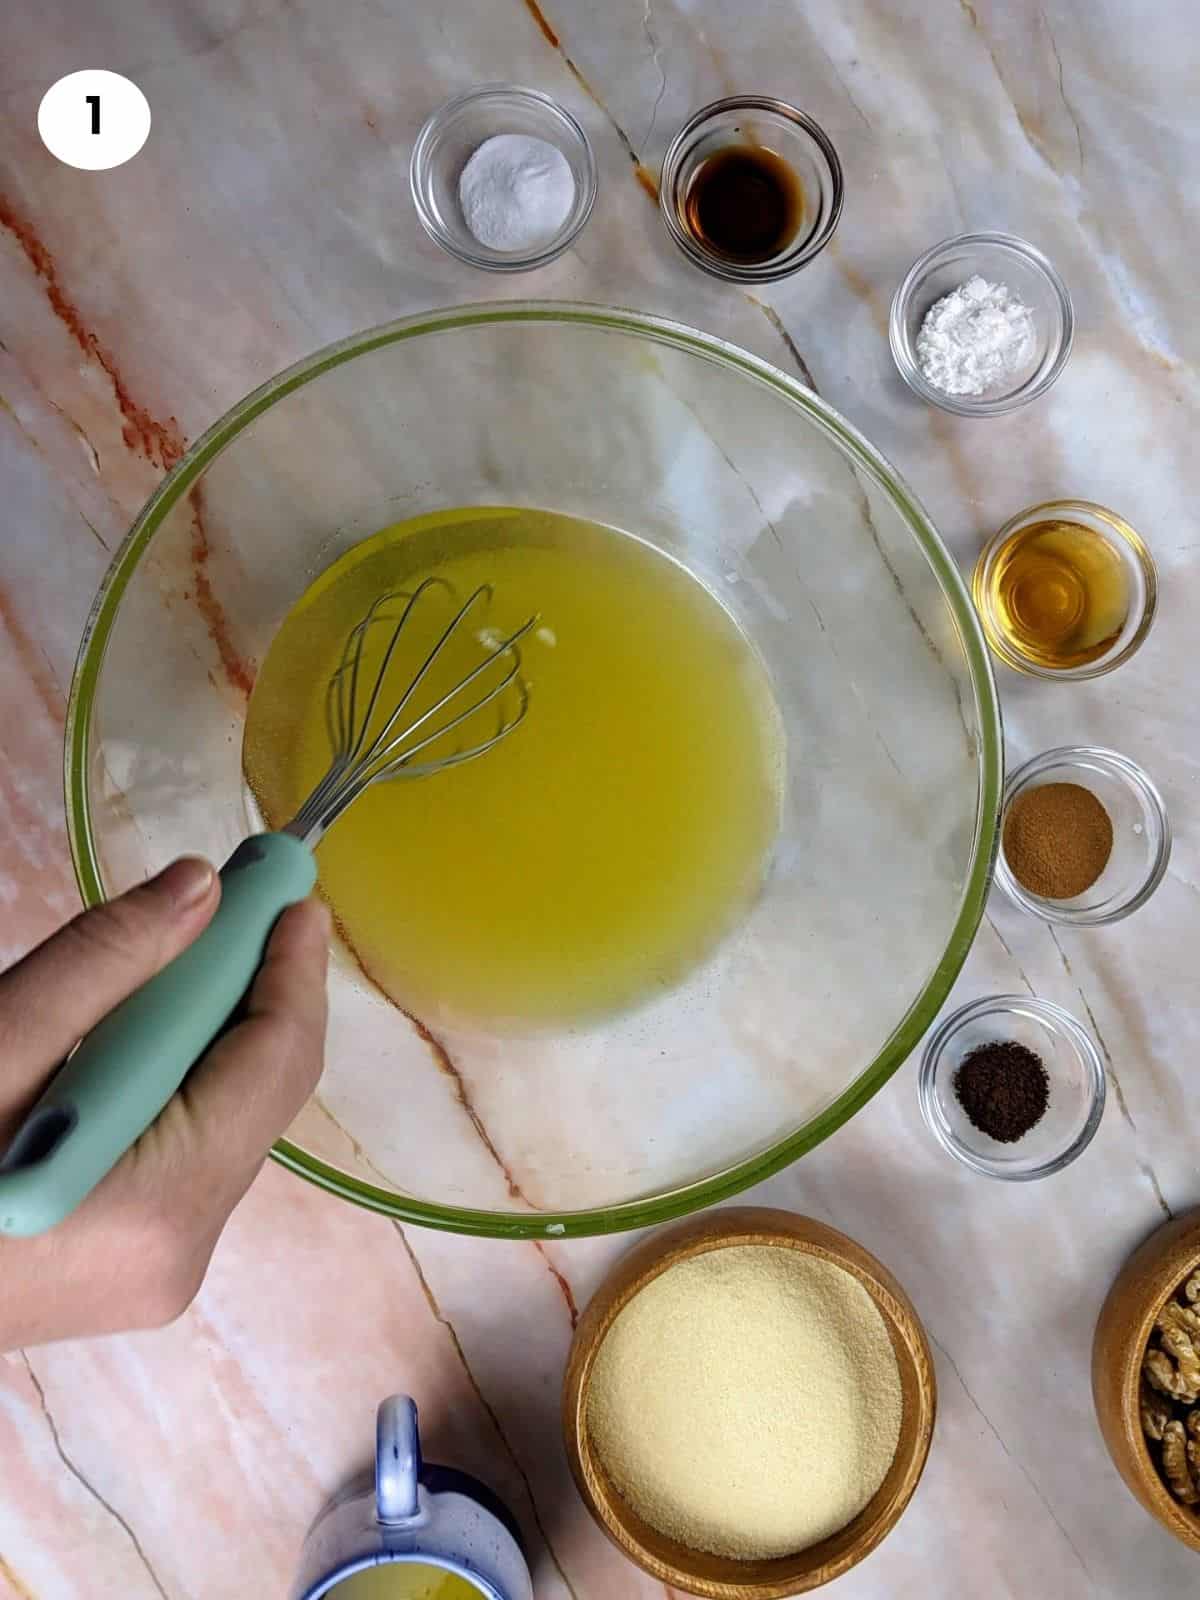 Mixing the olive oil and sugar